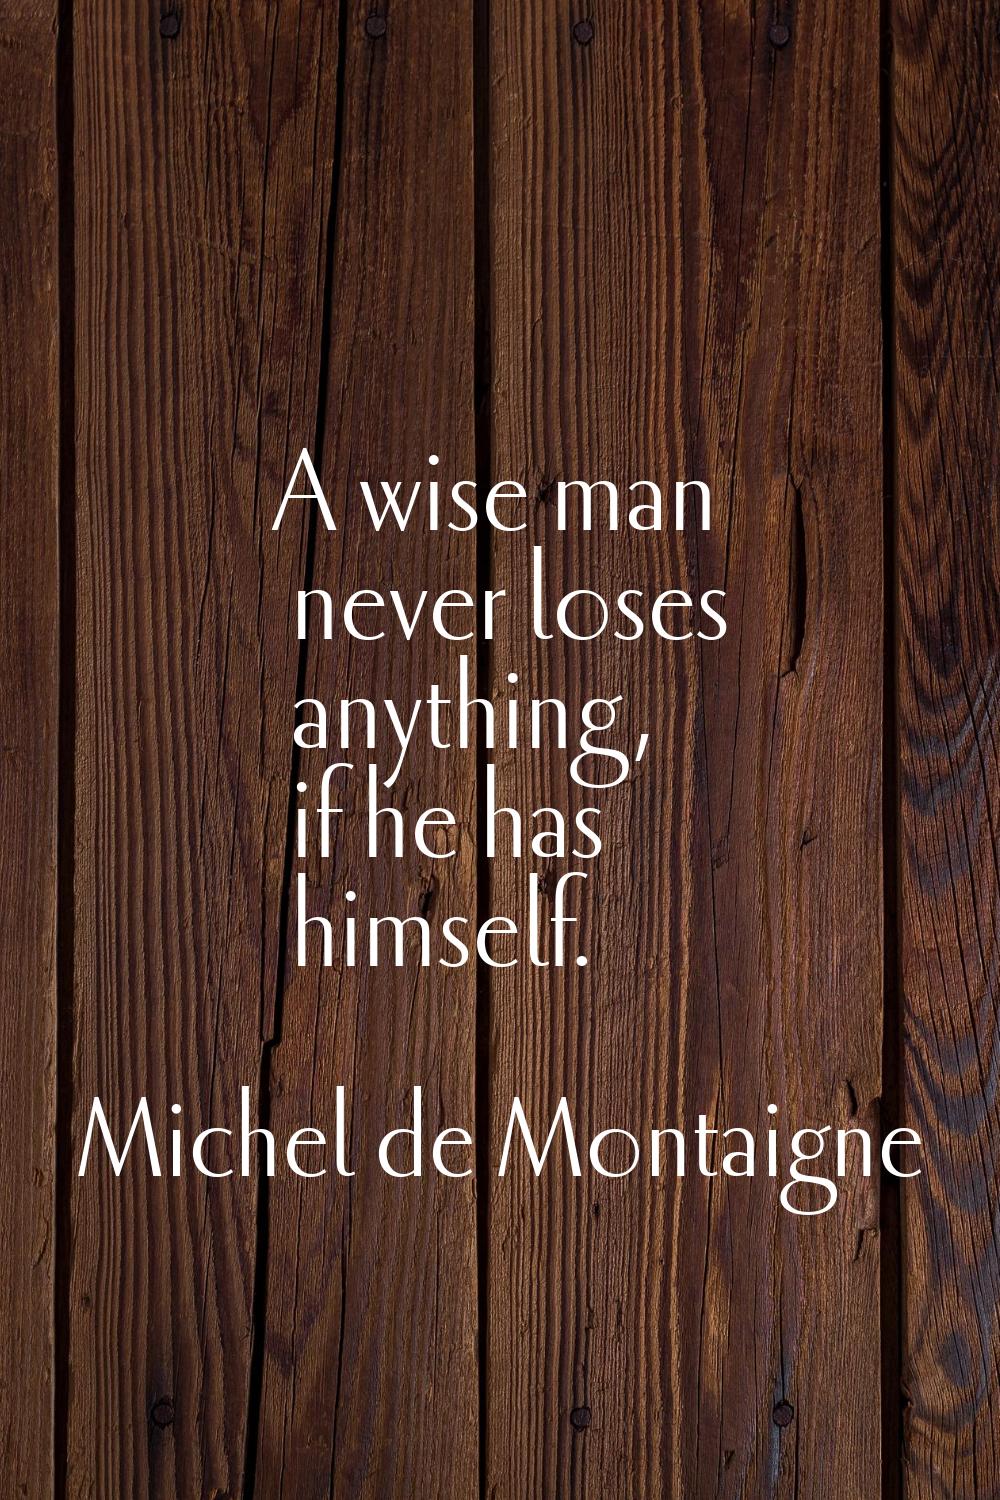 A wise man never loses anything, if he has himself.